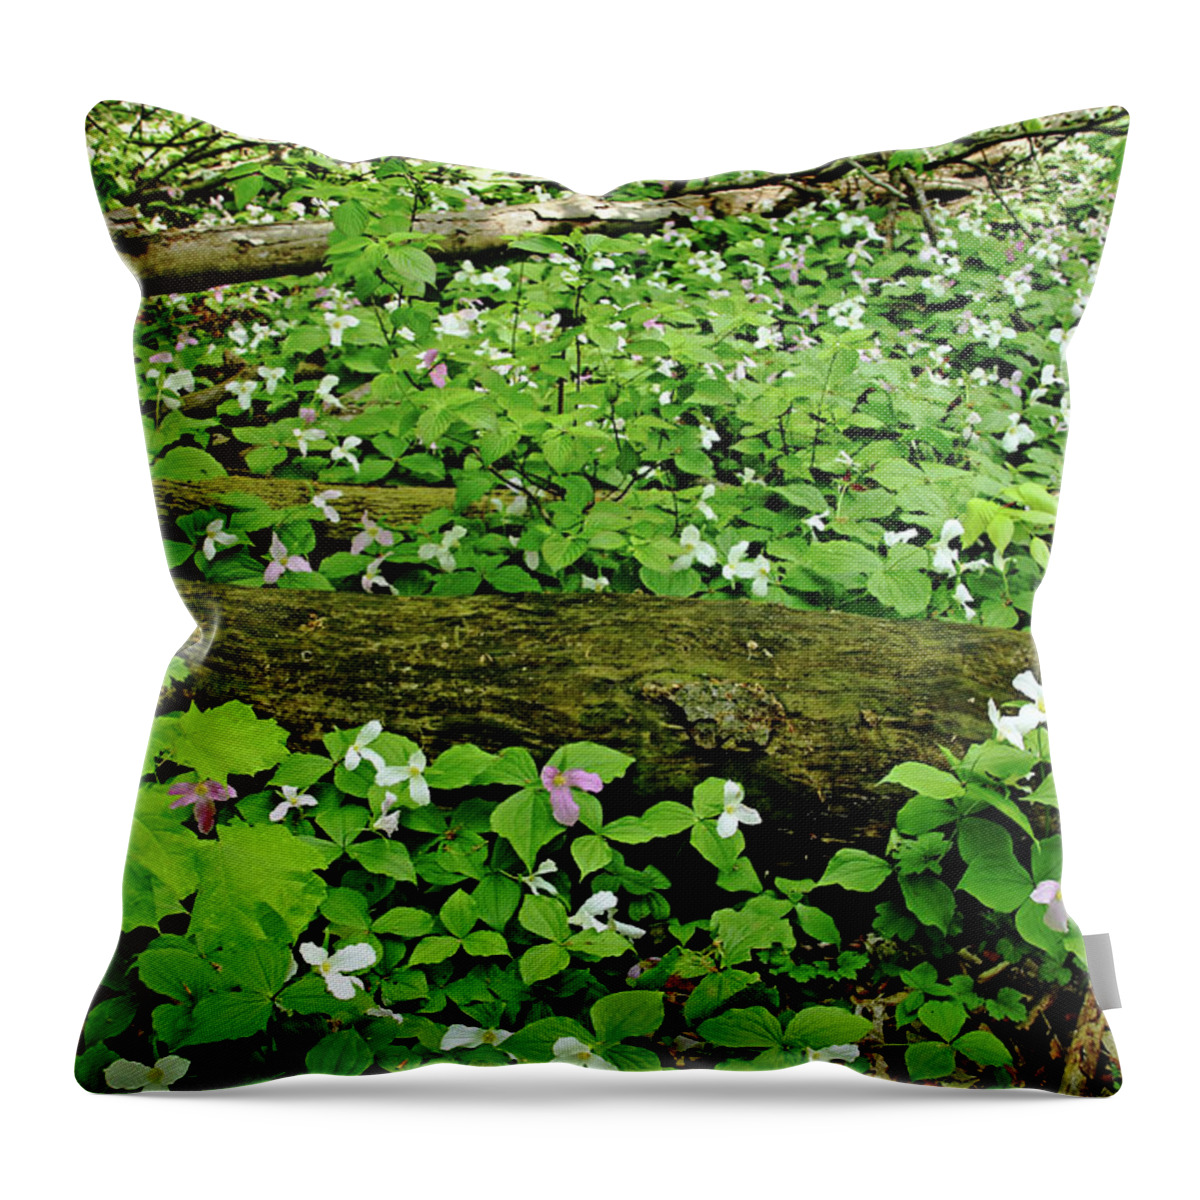 Trilliums Throw Pillow featuring the photograph Trillium Woods V by Debbie Oppermann